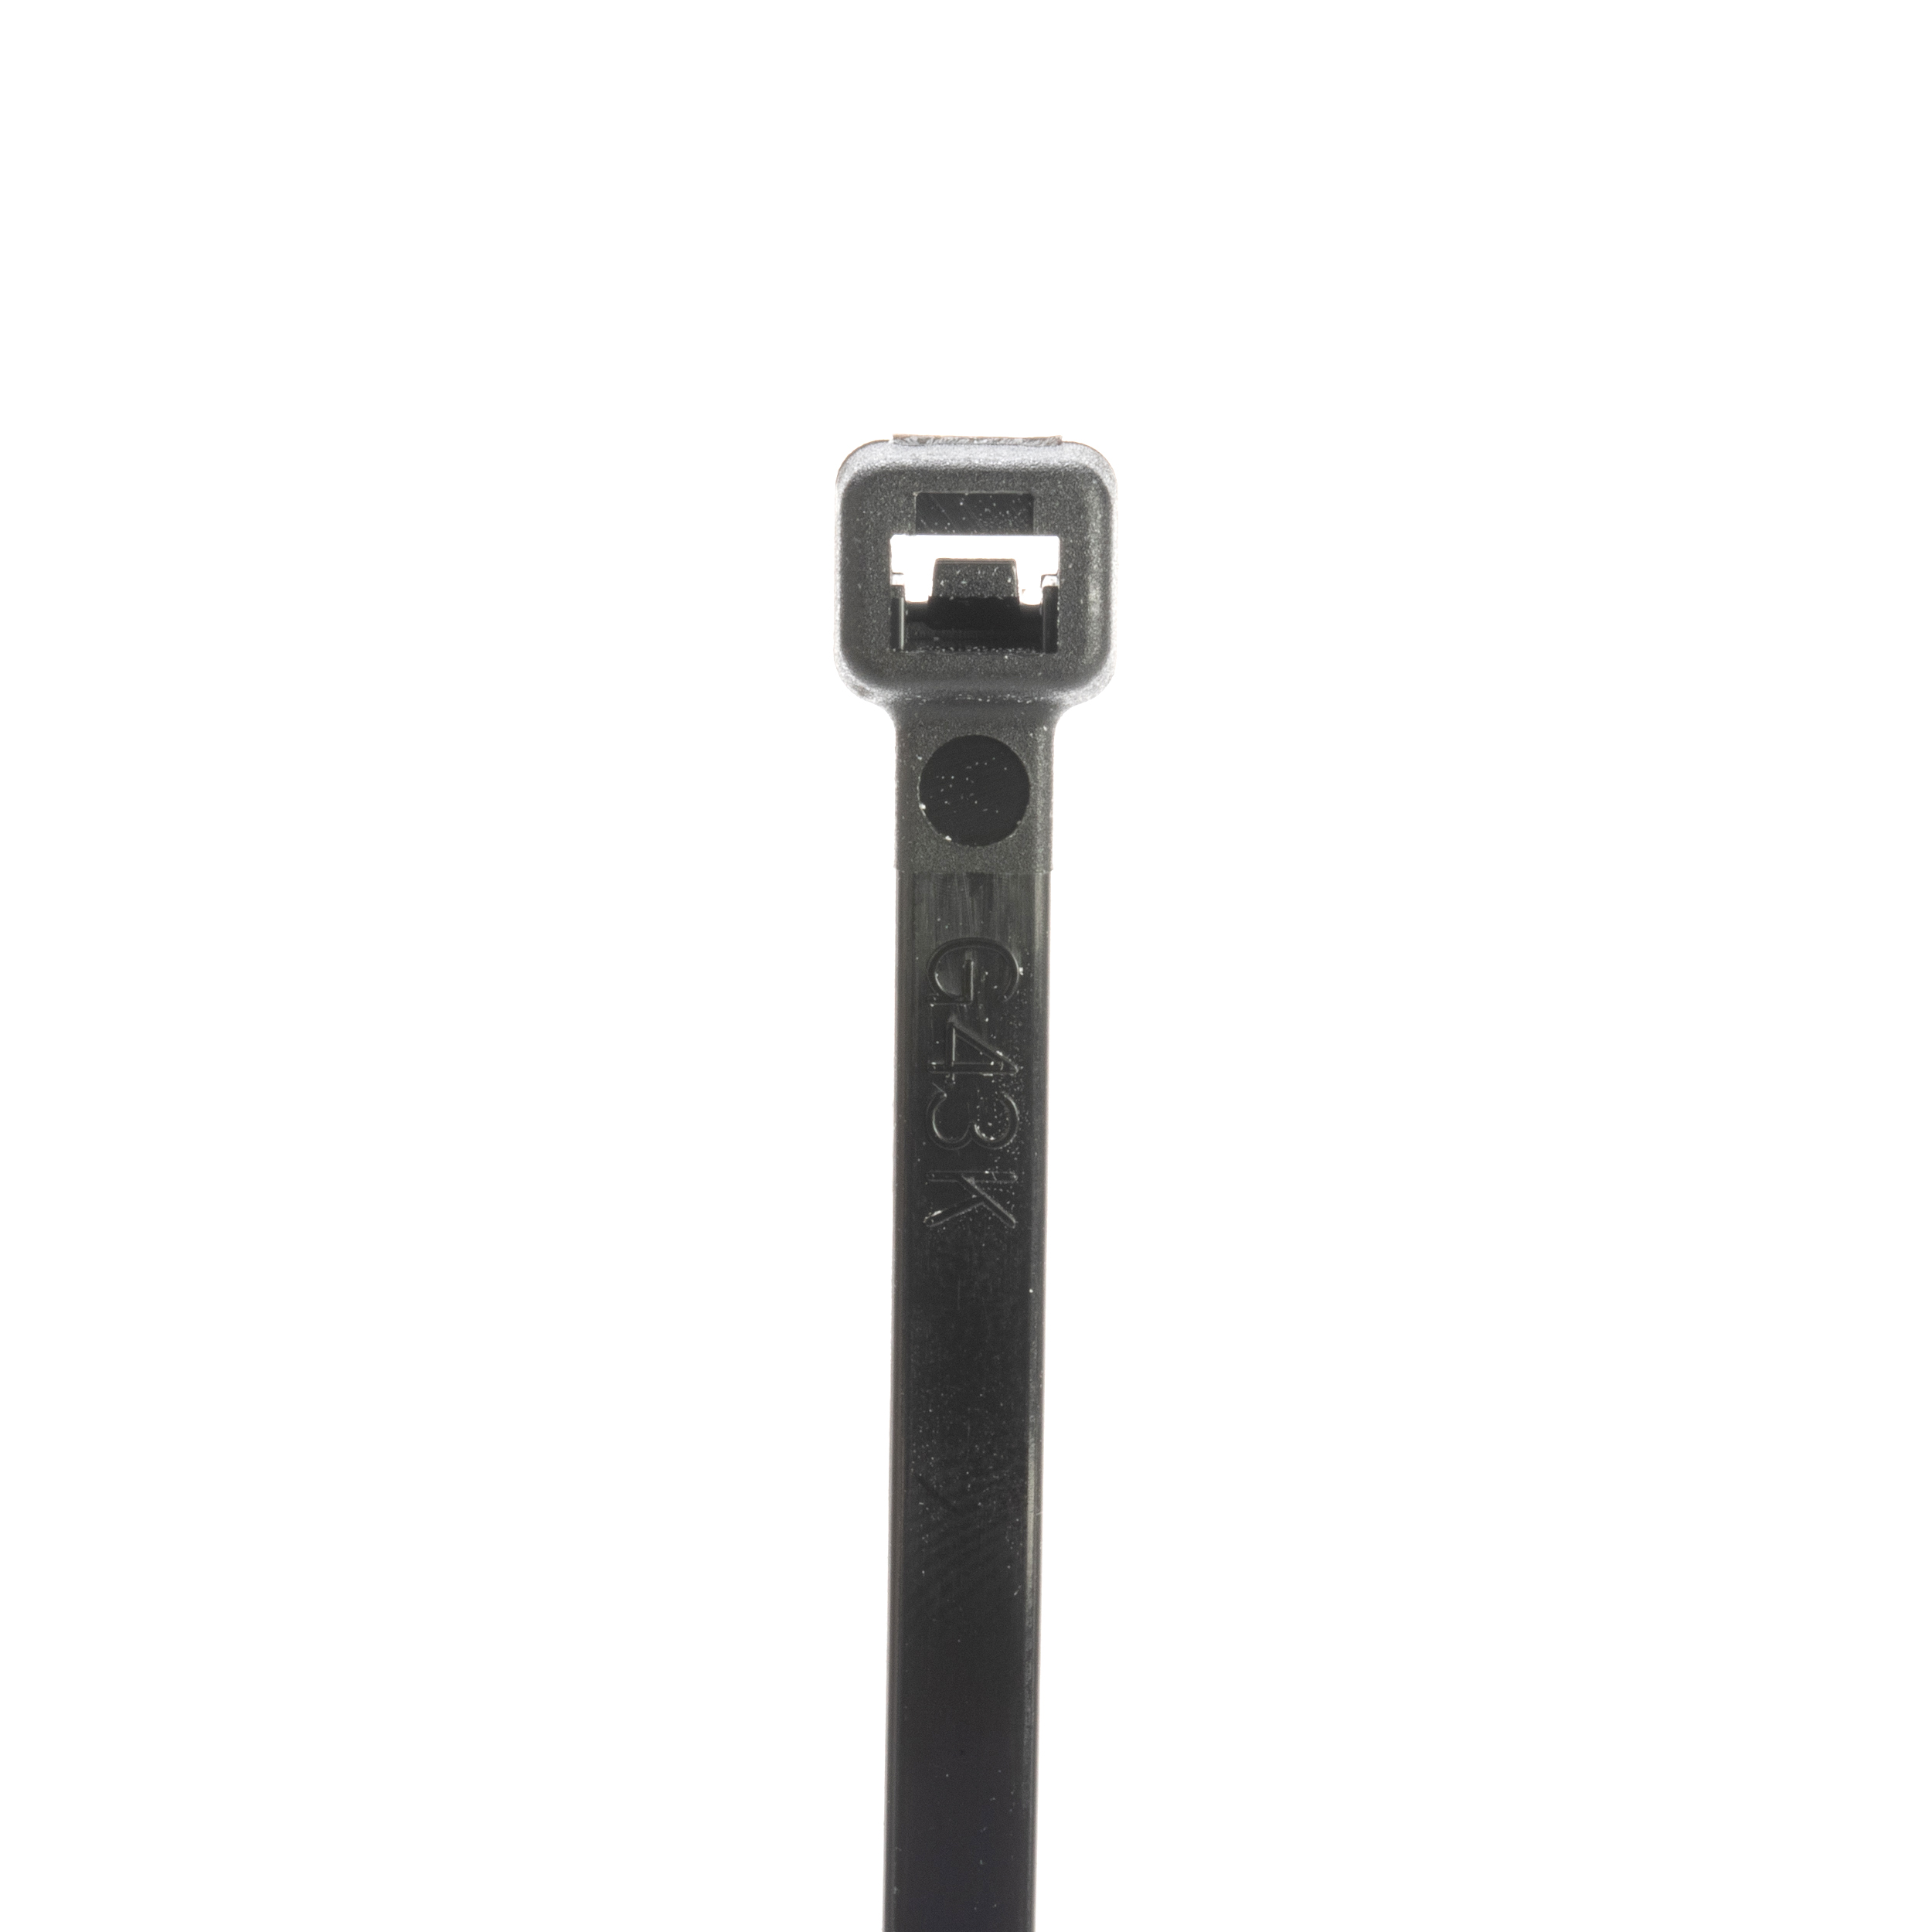 StrongHold™ S8-40-C0 Cable Tie, Black, PA 6.6, 40lb Min Loop Tensile, 7.87"